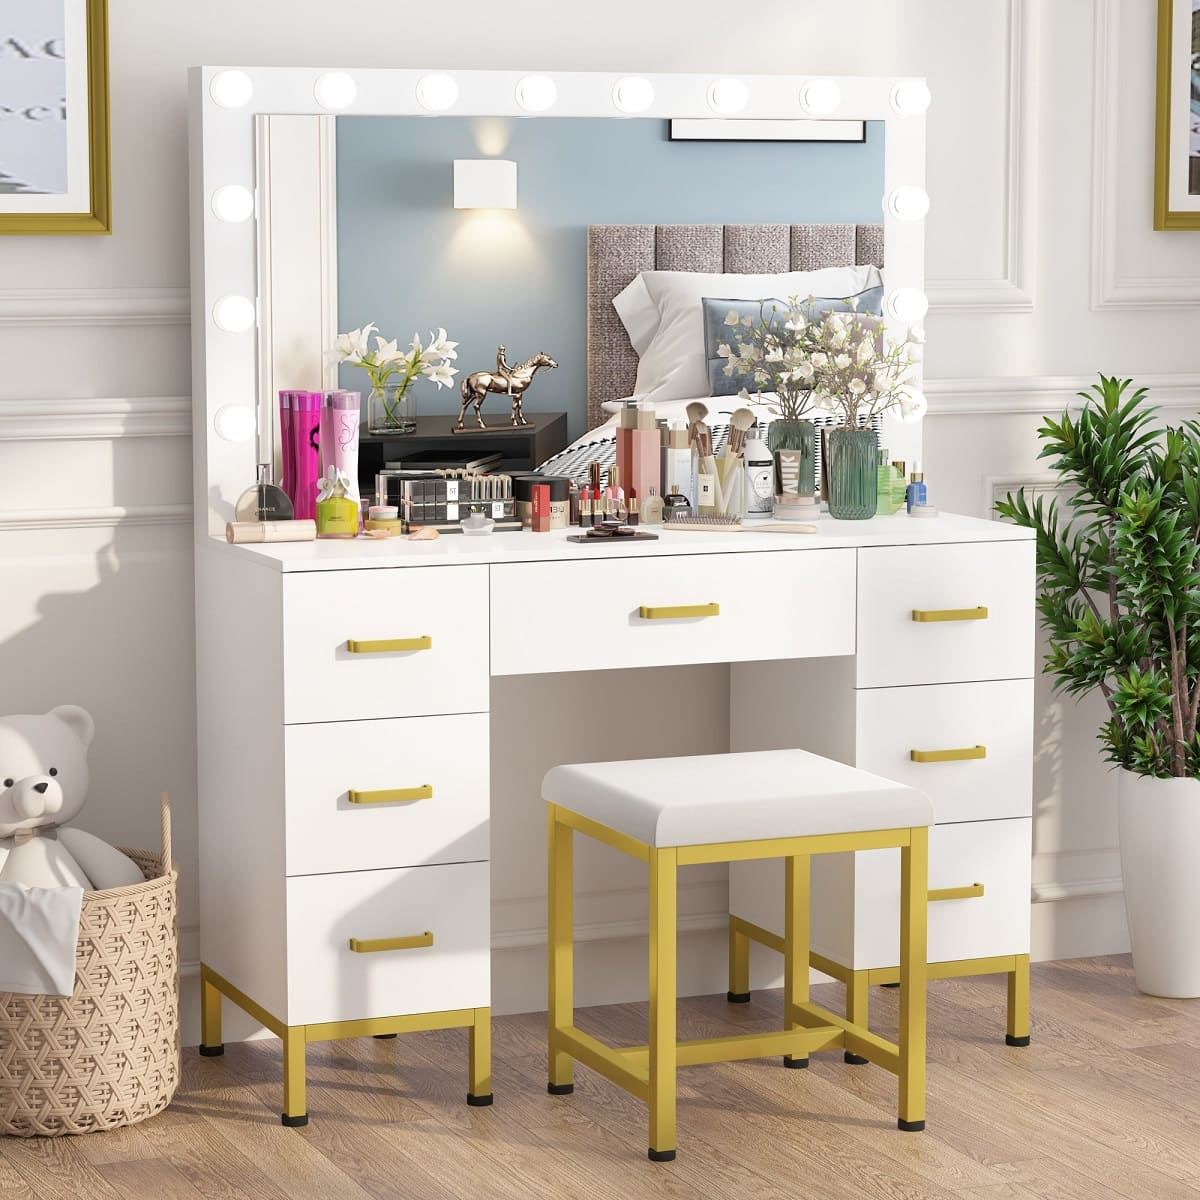 How To Decorate A Makeup Vanity